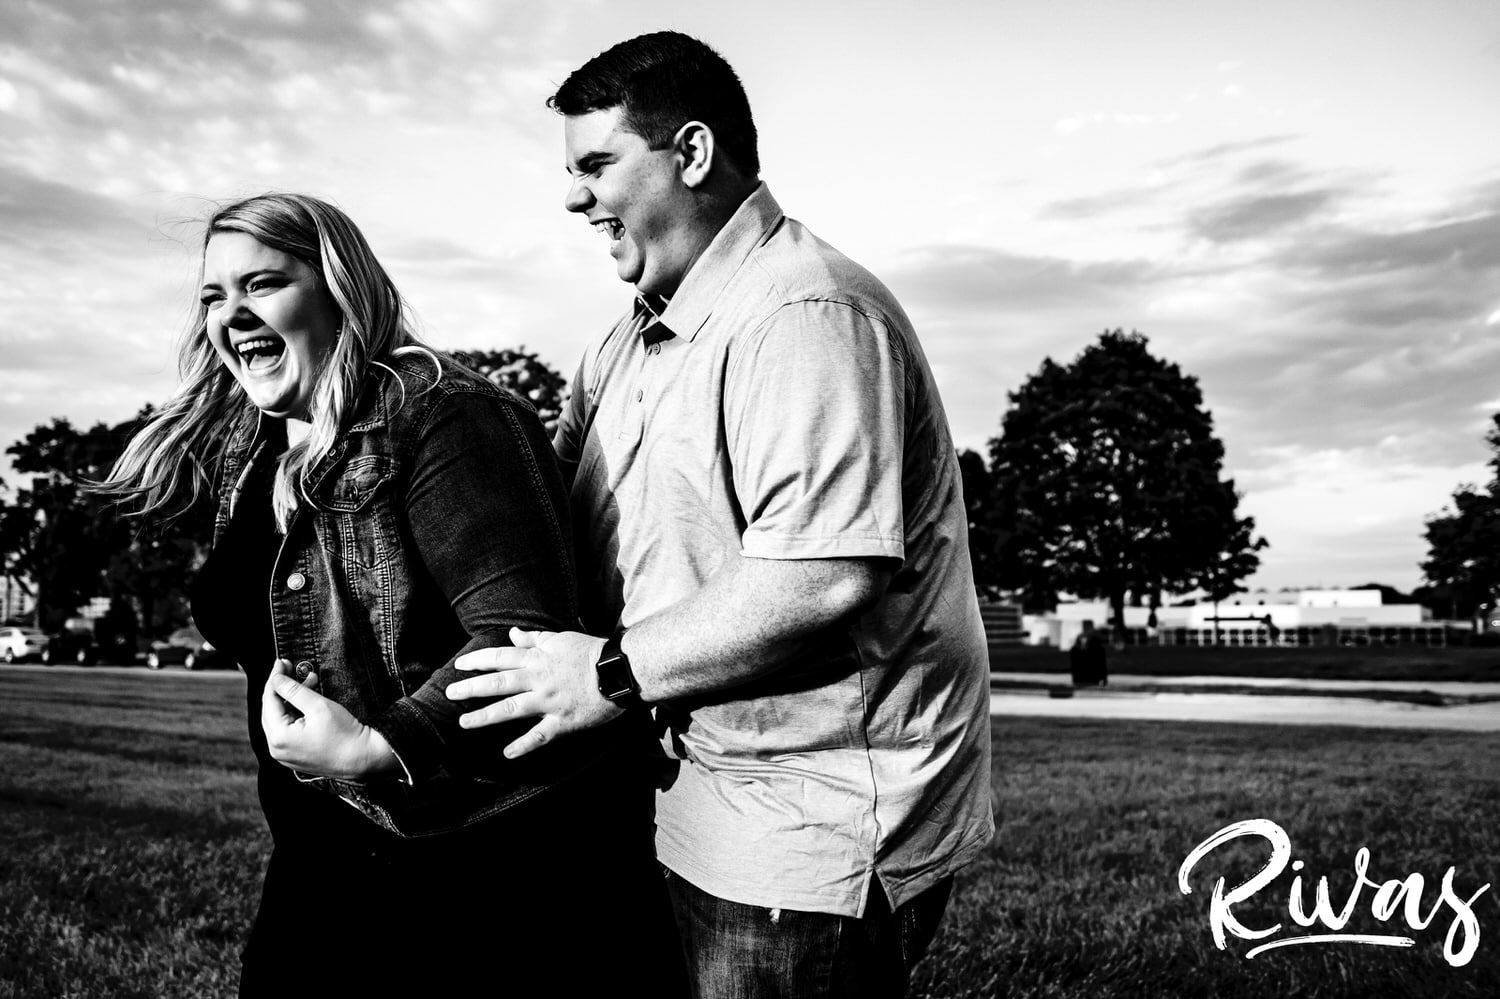 A candid black and white picture of a man tickling his fiance as she laughs hysterically and tries to scoot away during their Liberty Memorial summer engagement photography session in Kansas City.